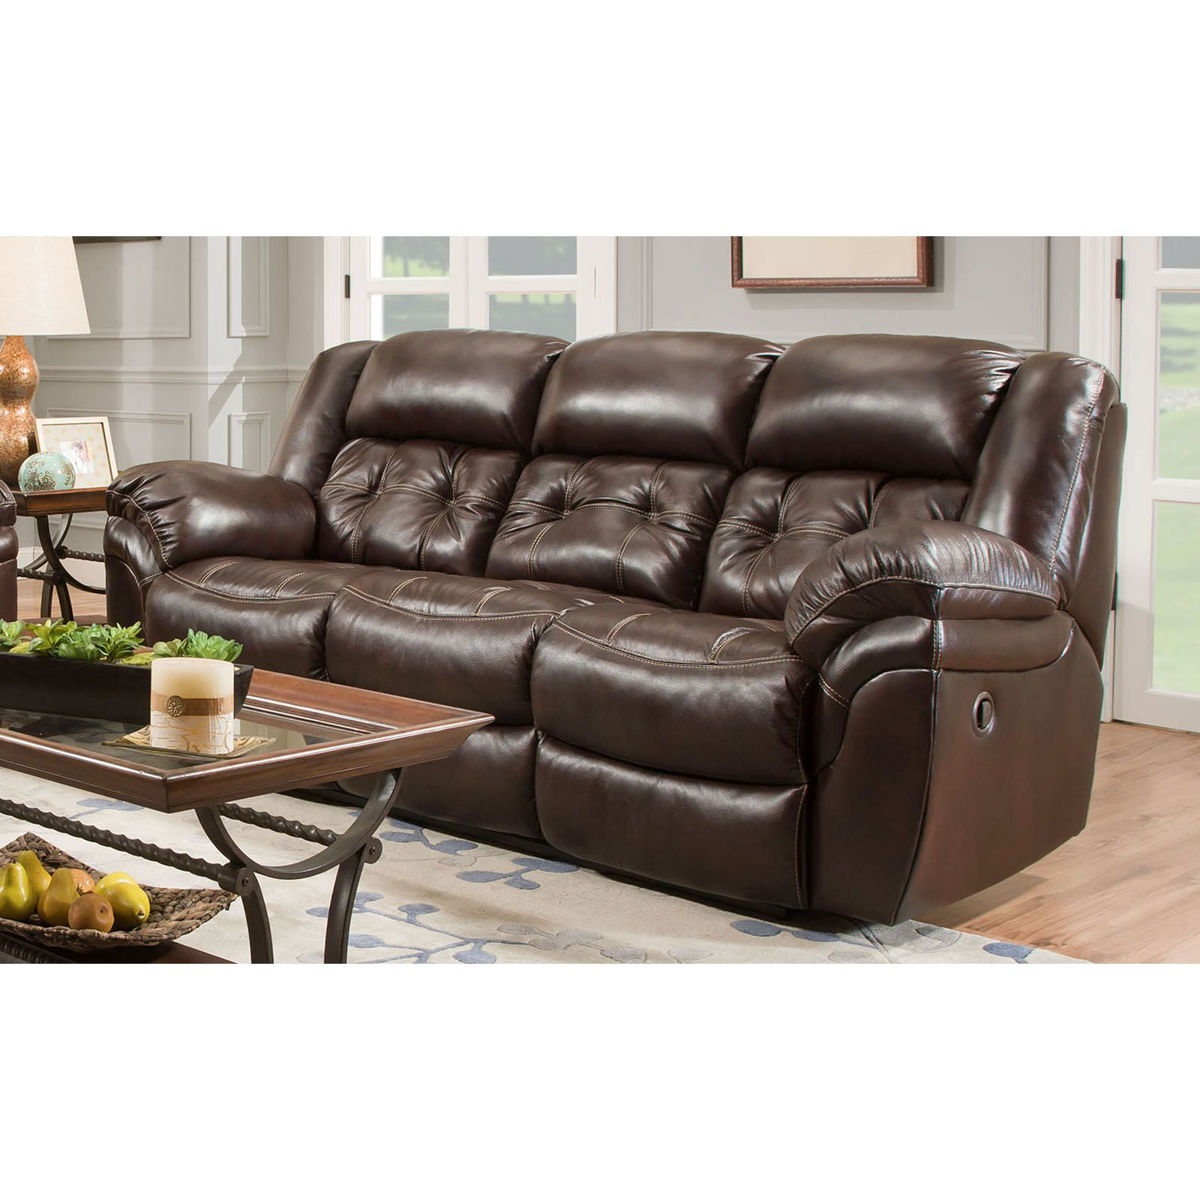 Picture of Whiskey Leather Power Recliner Sofa